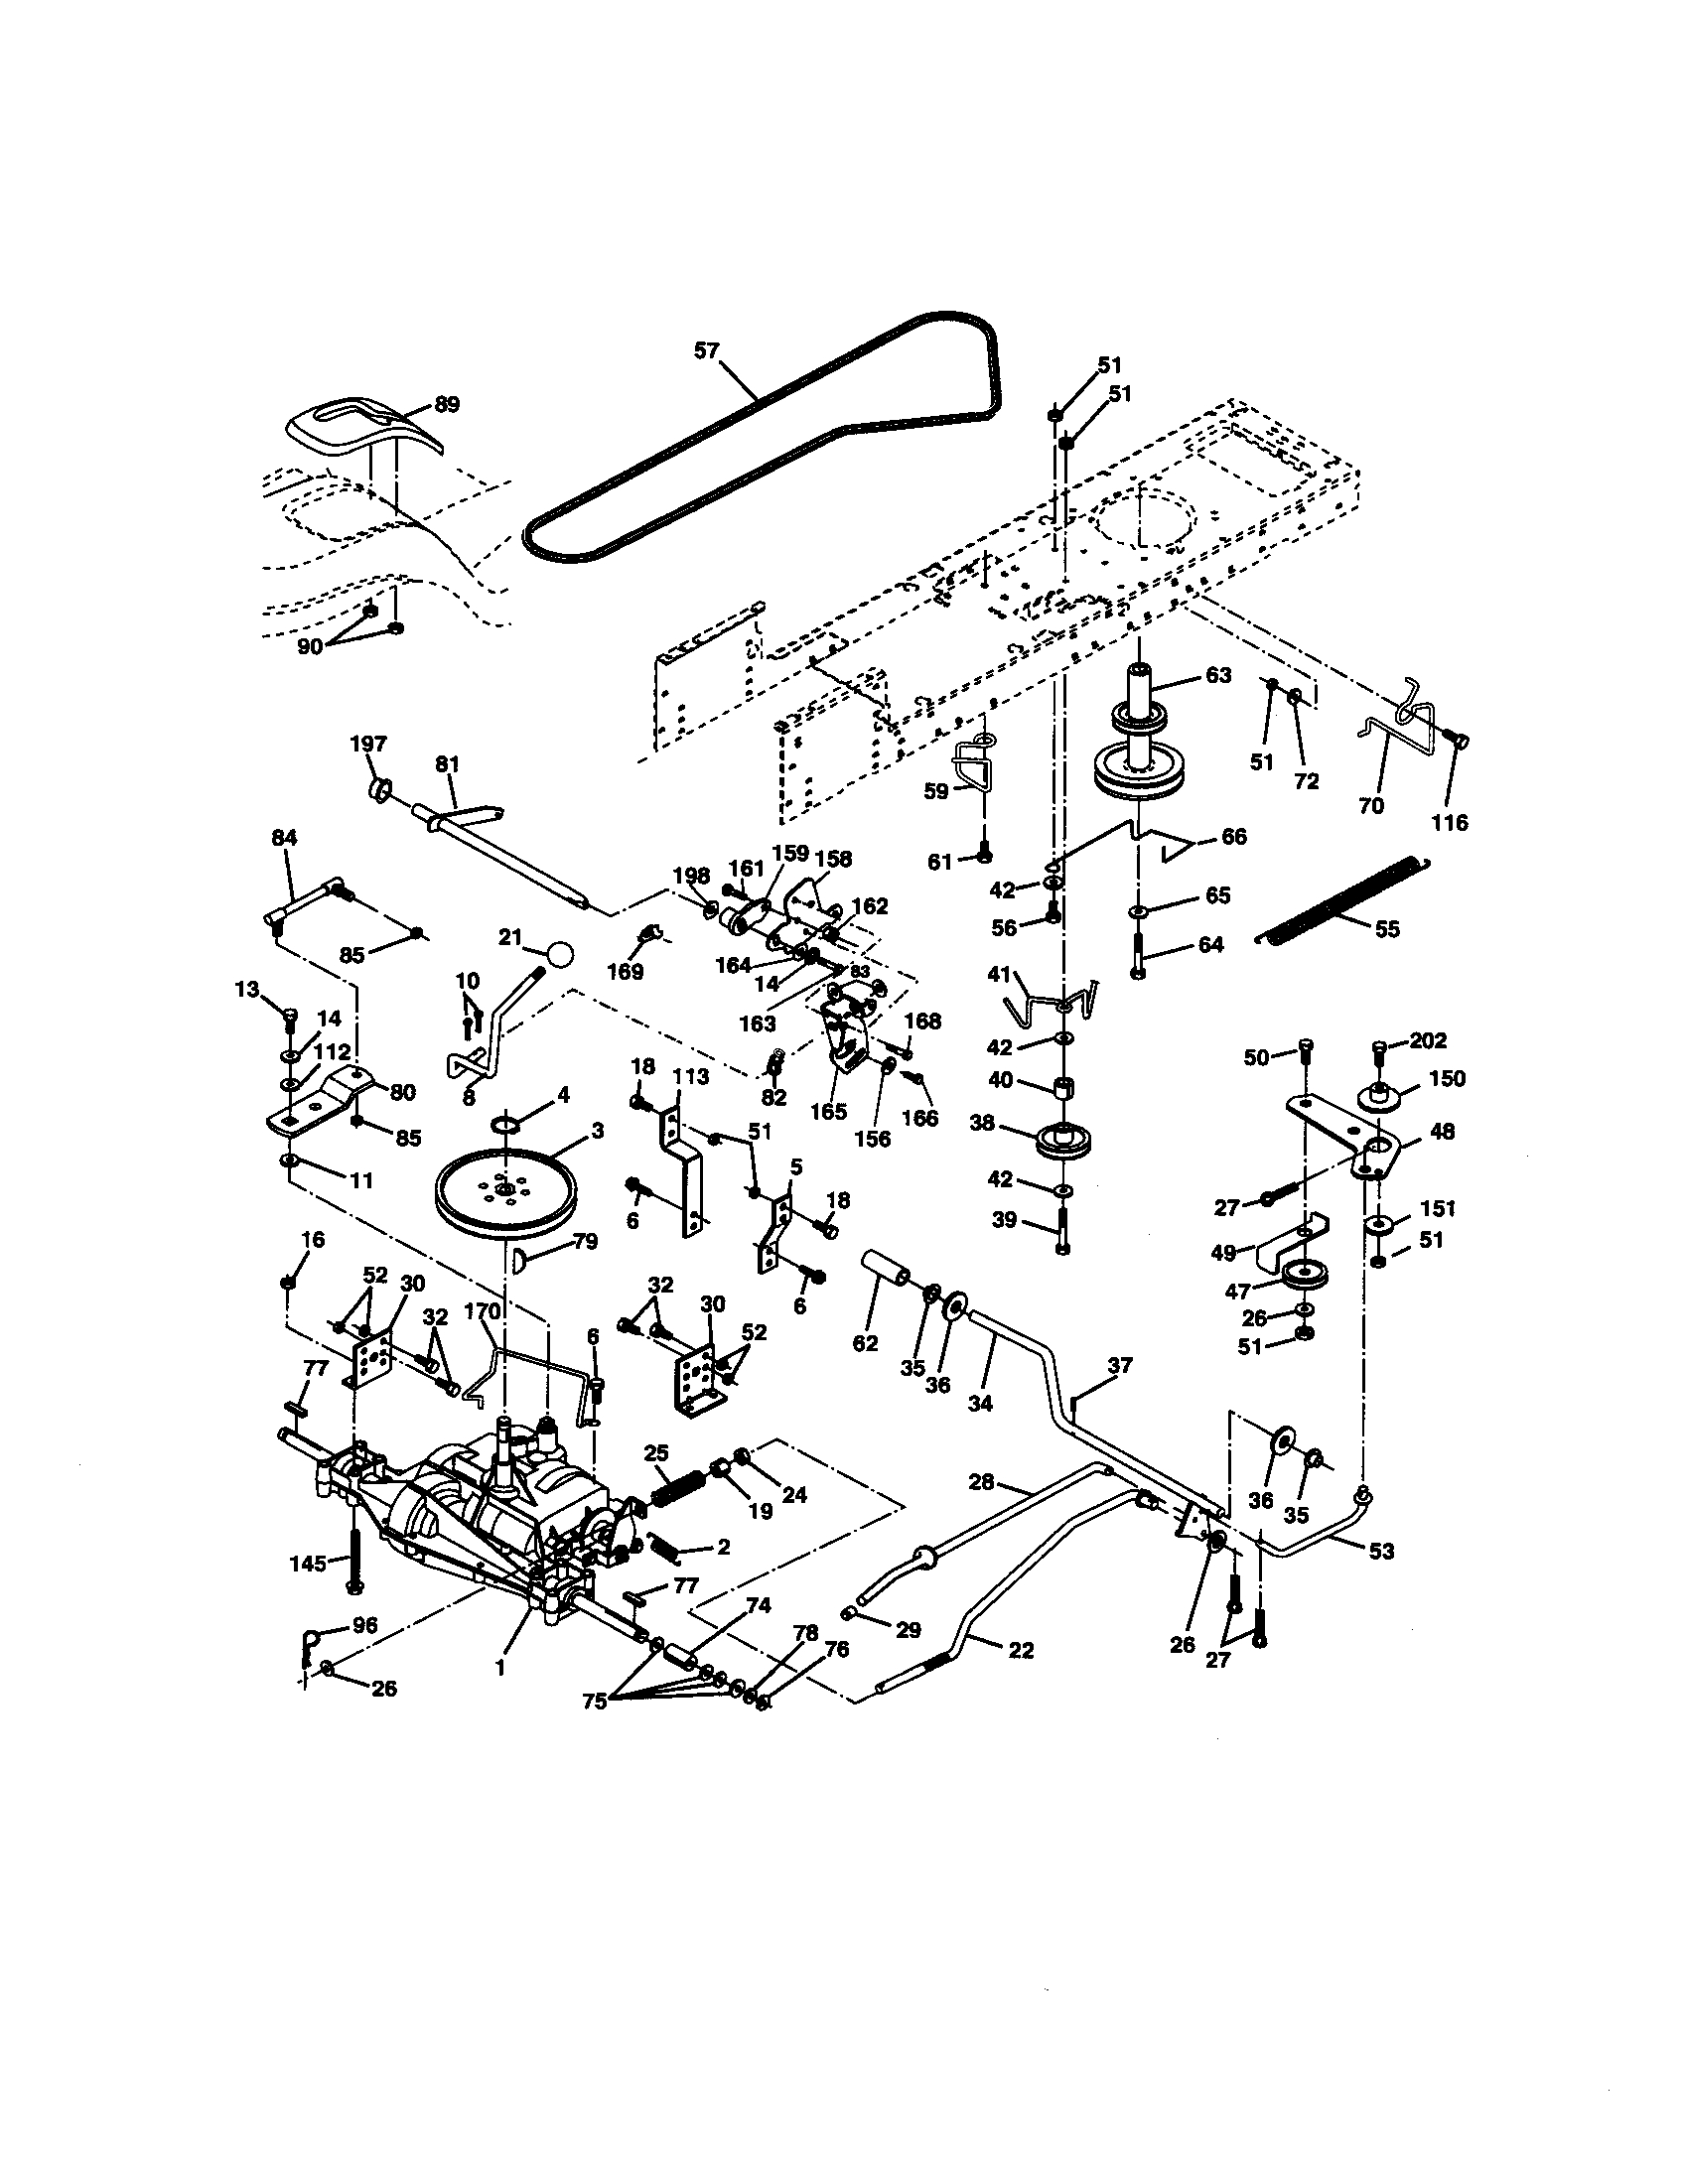 Craftsman Hydrostatic Transmission Diagram Looking For Craftsman Model 917270671 Front Engine Lawn Tractor